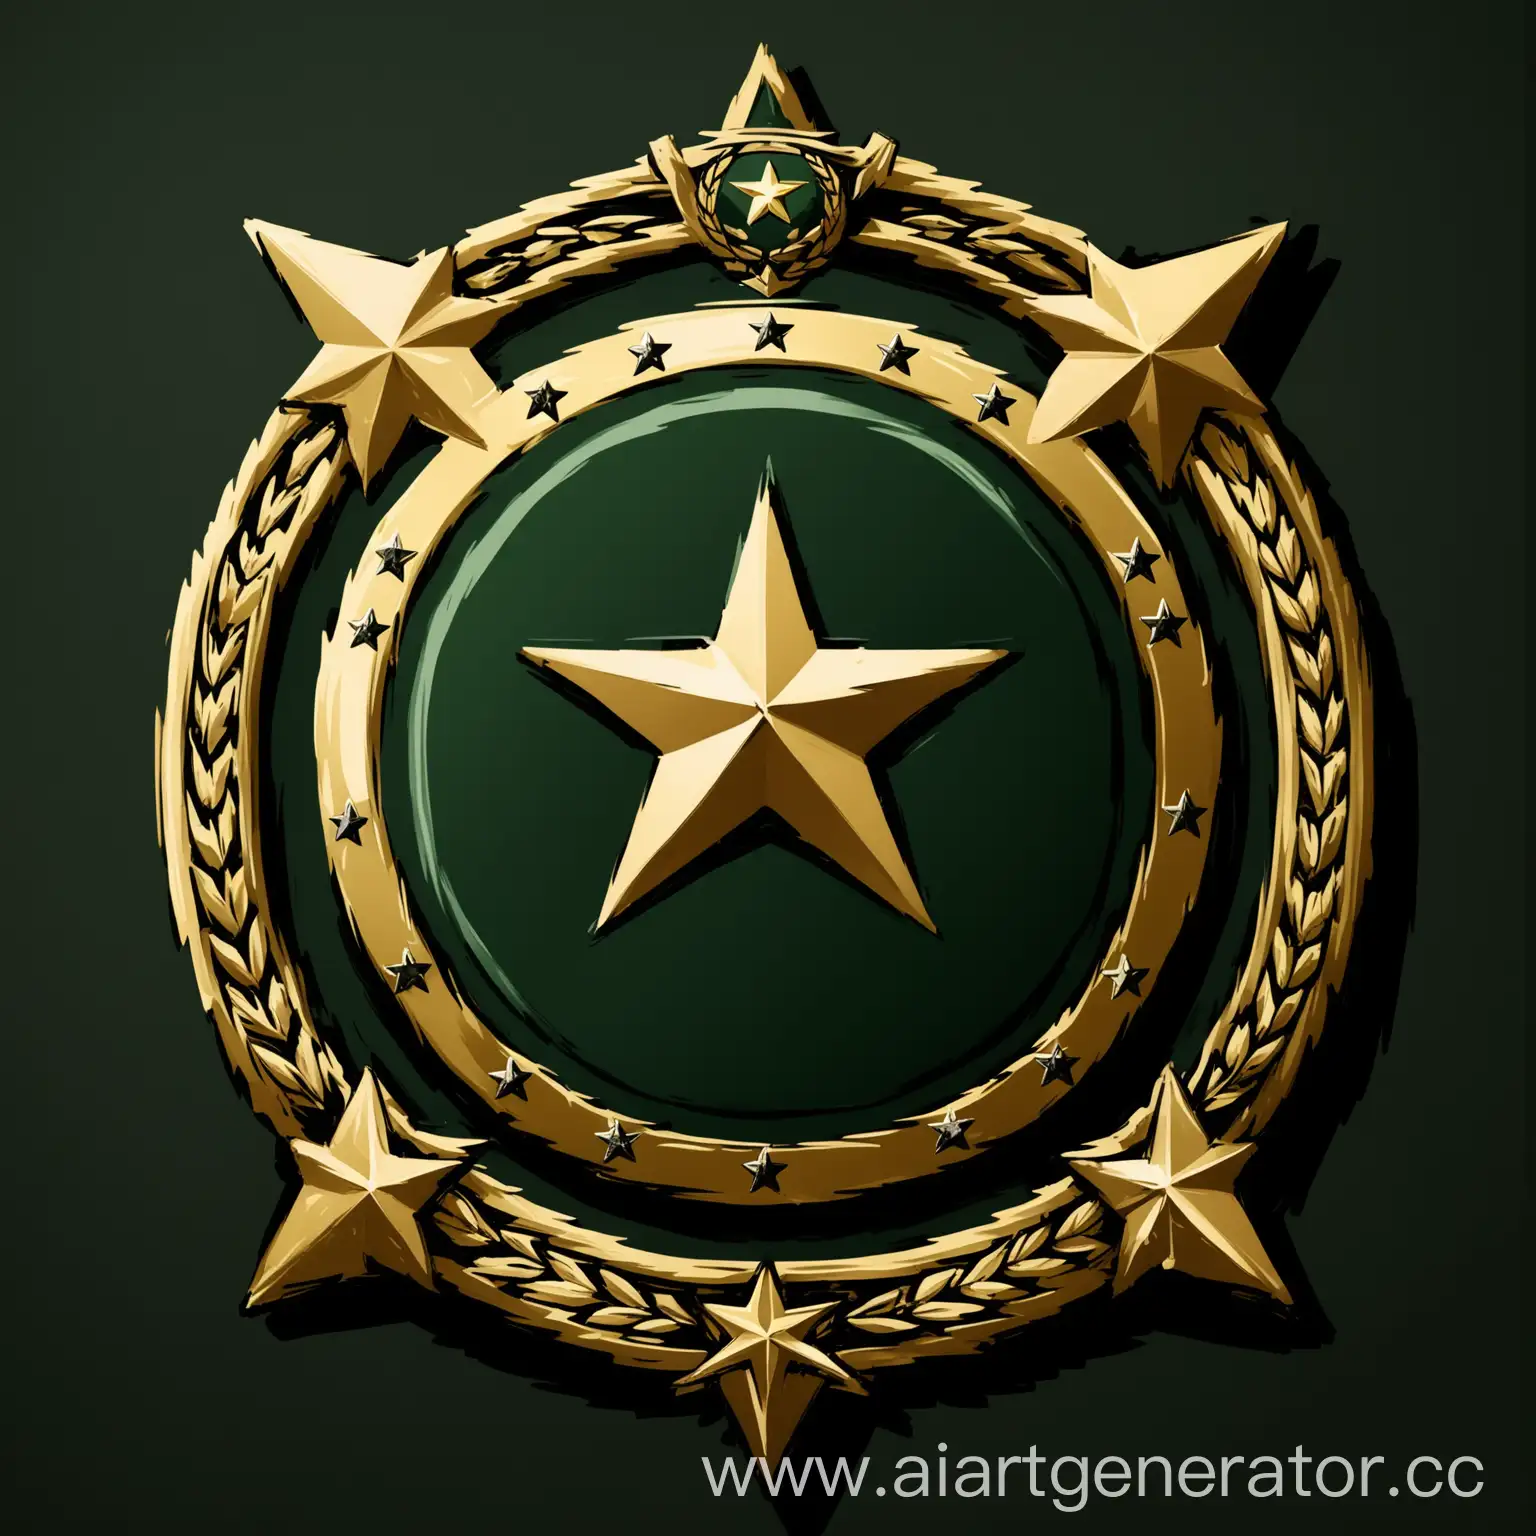 Traditional-Shield-Emblem-with-Dark-Green-Gold-and-Black-Colors-on-White-Background